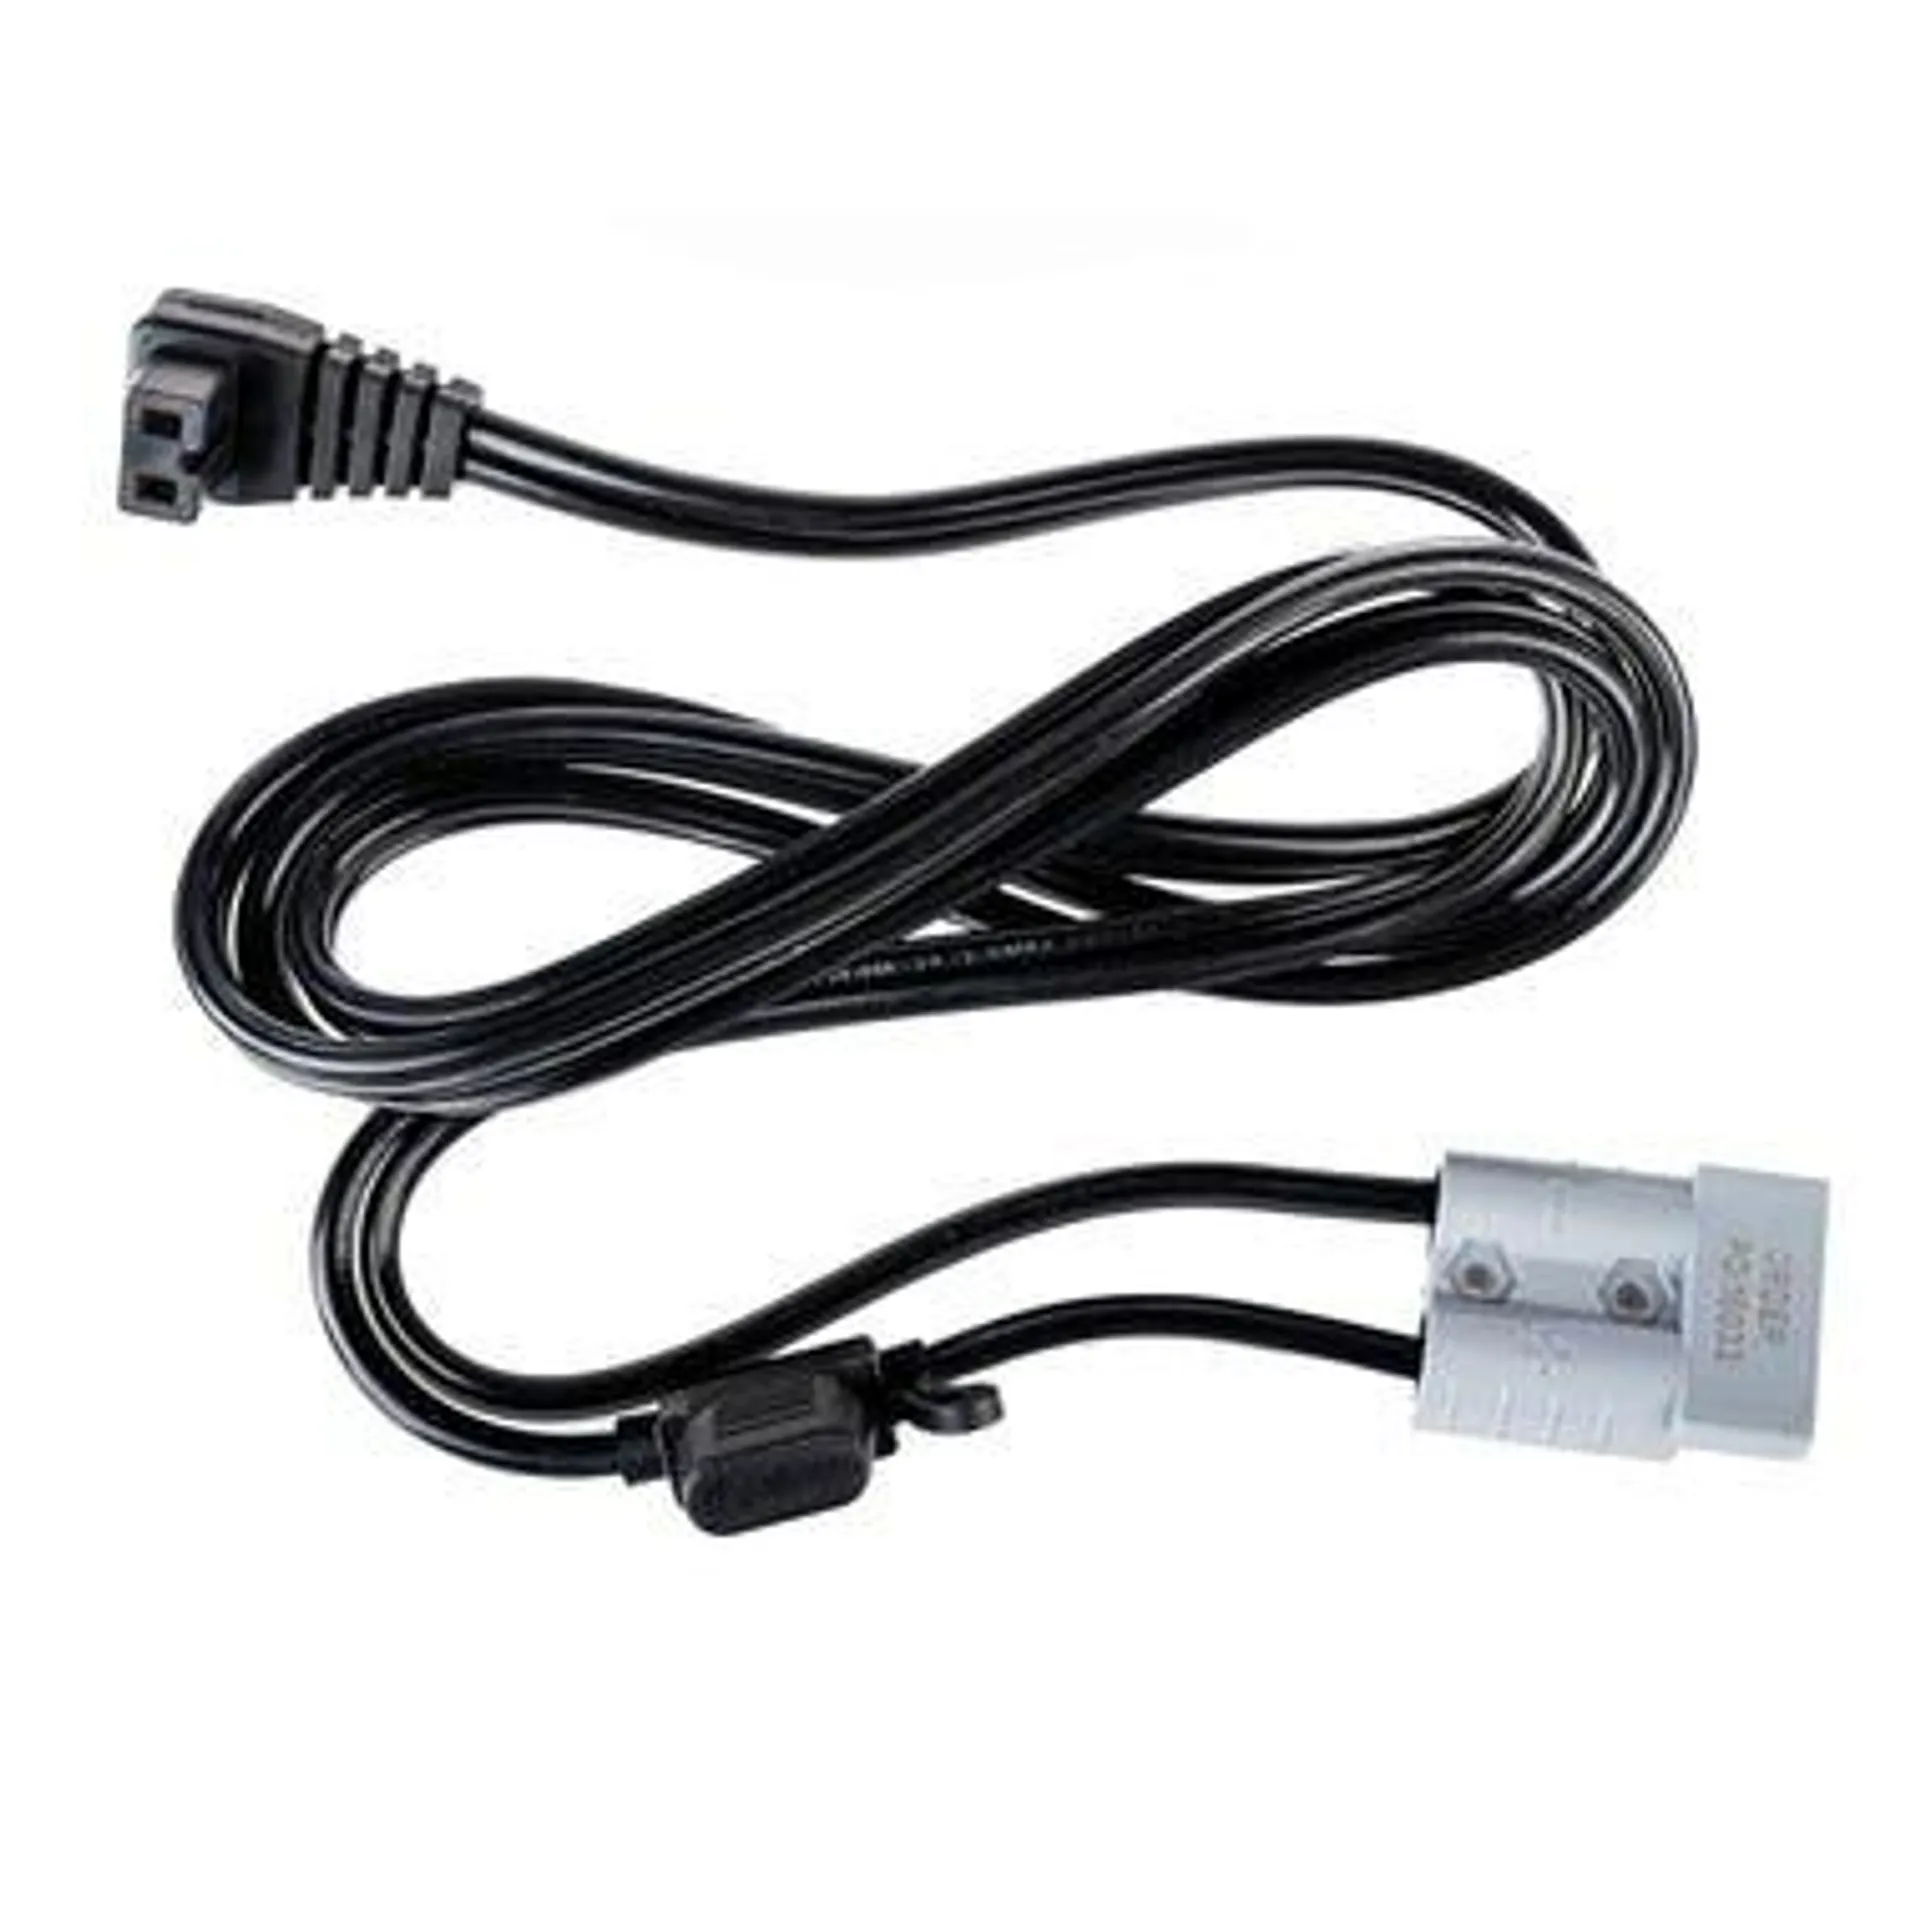 Kings 1.8m 12v Fridge Cable | Anderson-Style Plug | C11 Connector to Suit Kings & Many Other 12v Fridges | 14AWG Cable